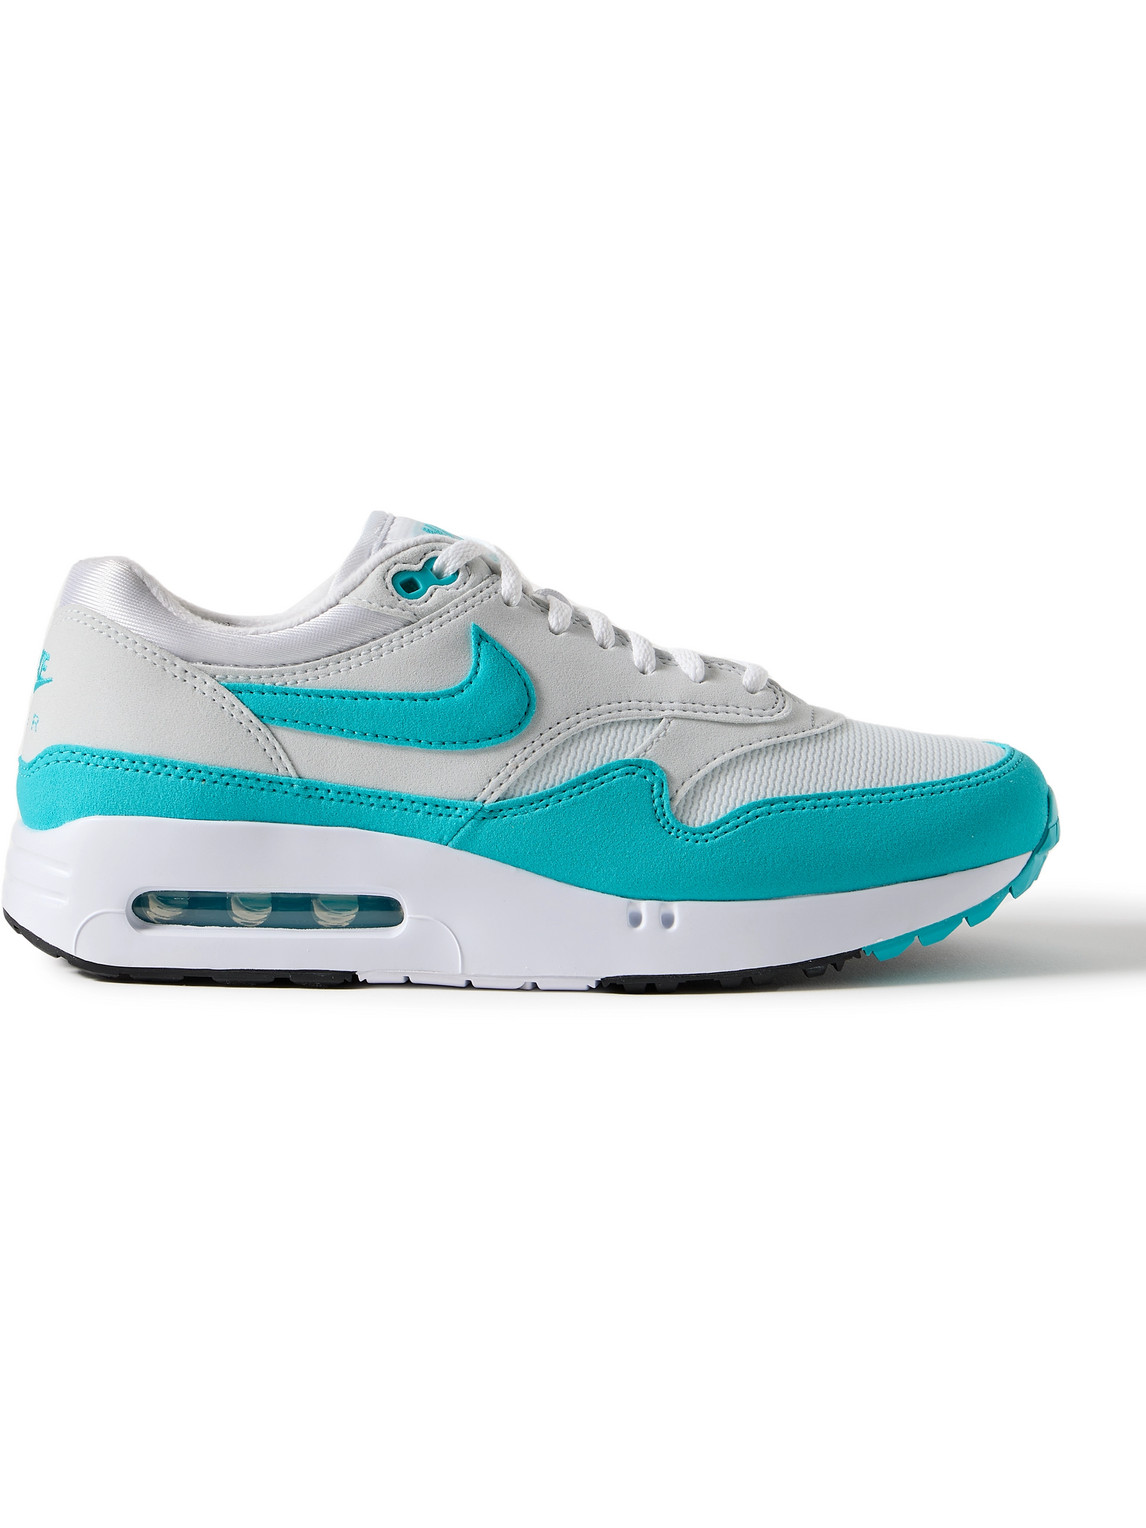 Air Max 1 ’86 OG G Suede and Mesh Golf Sneakers